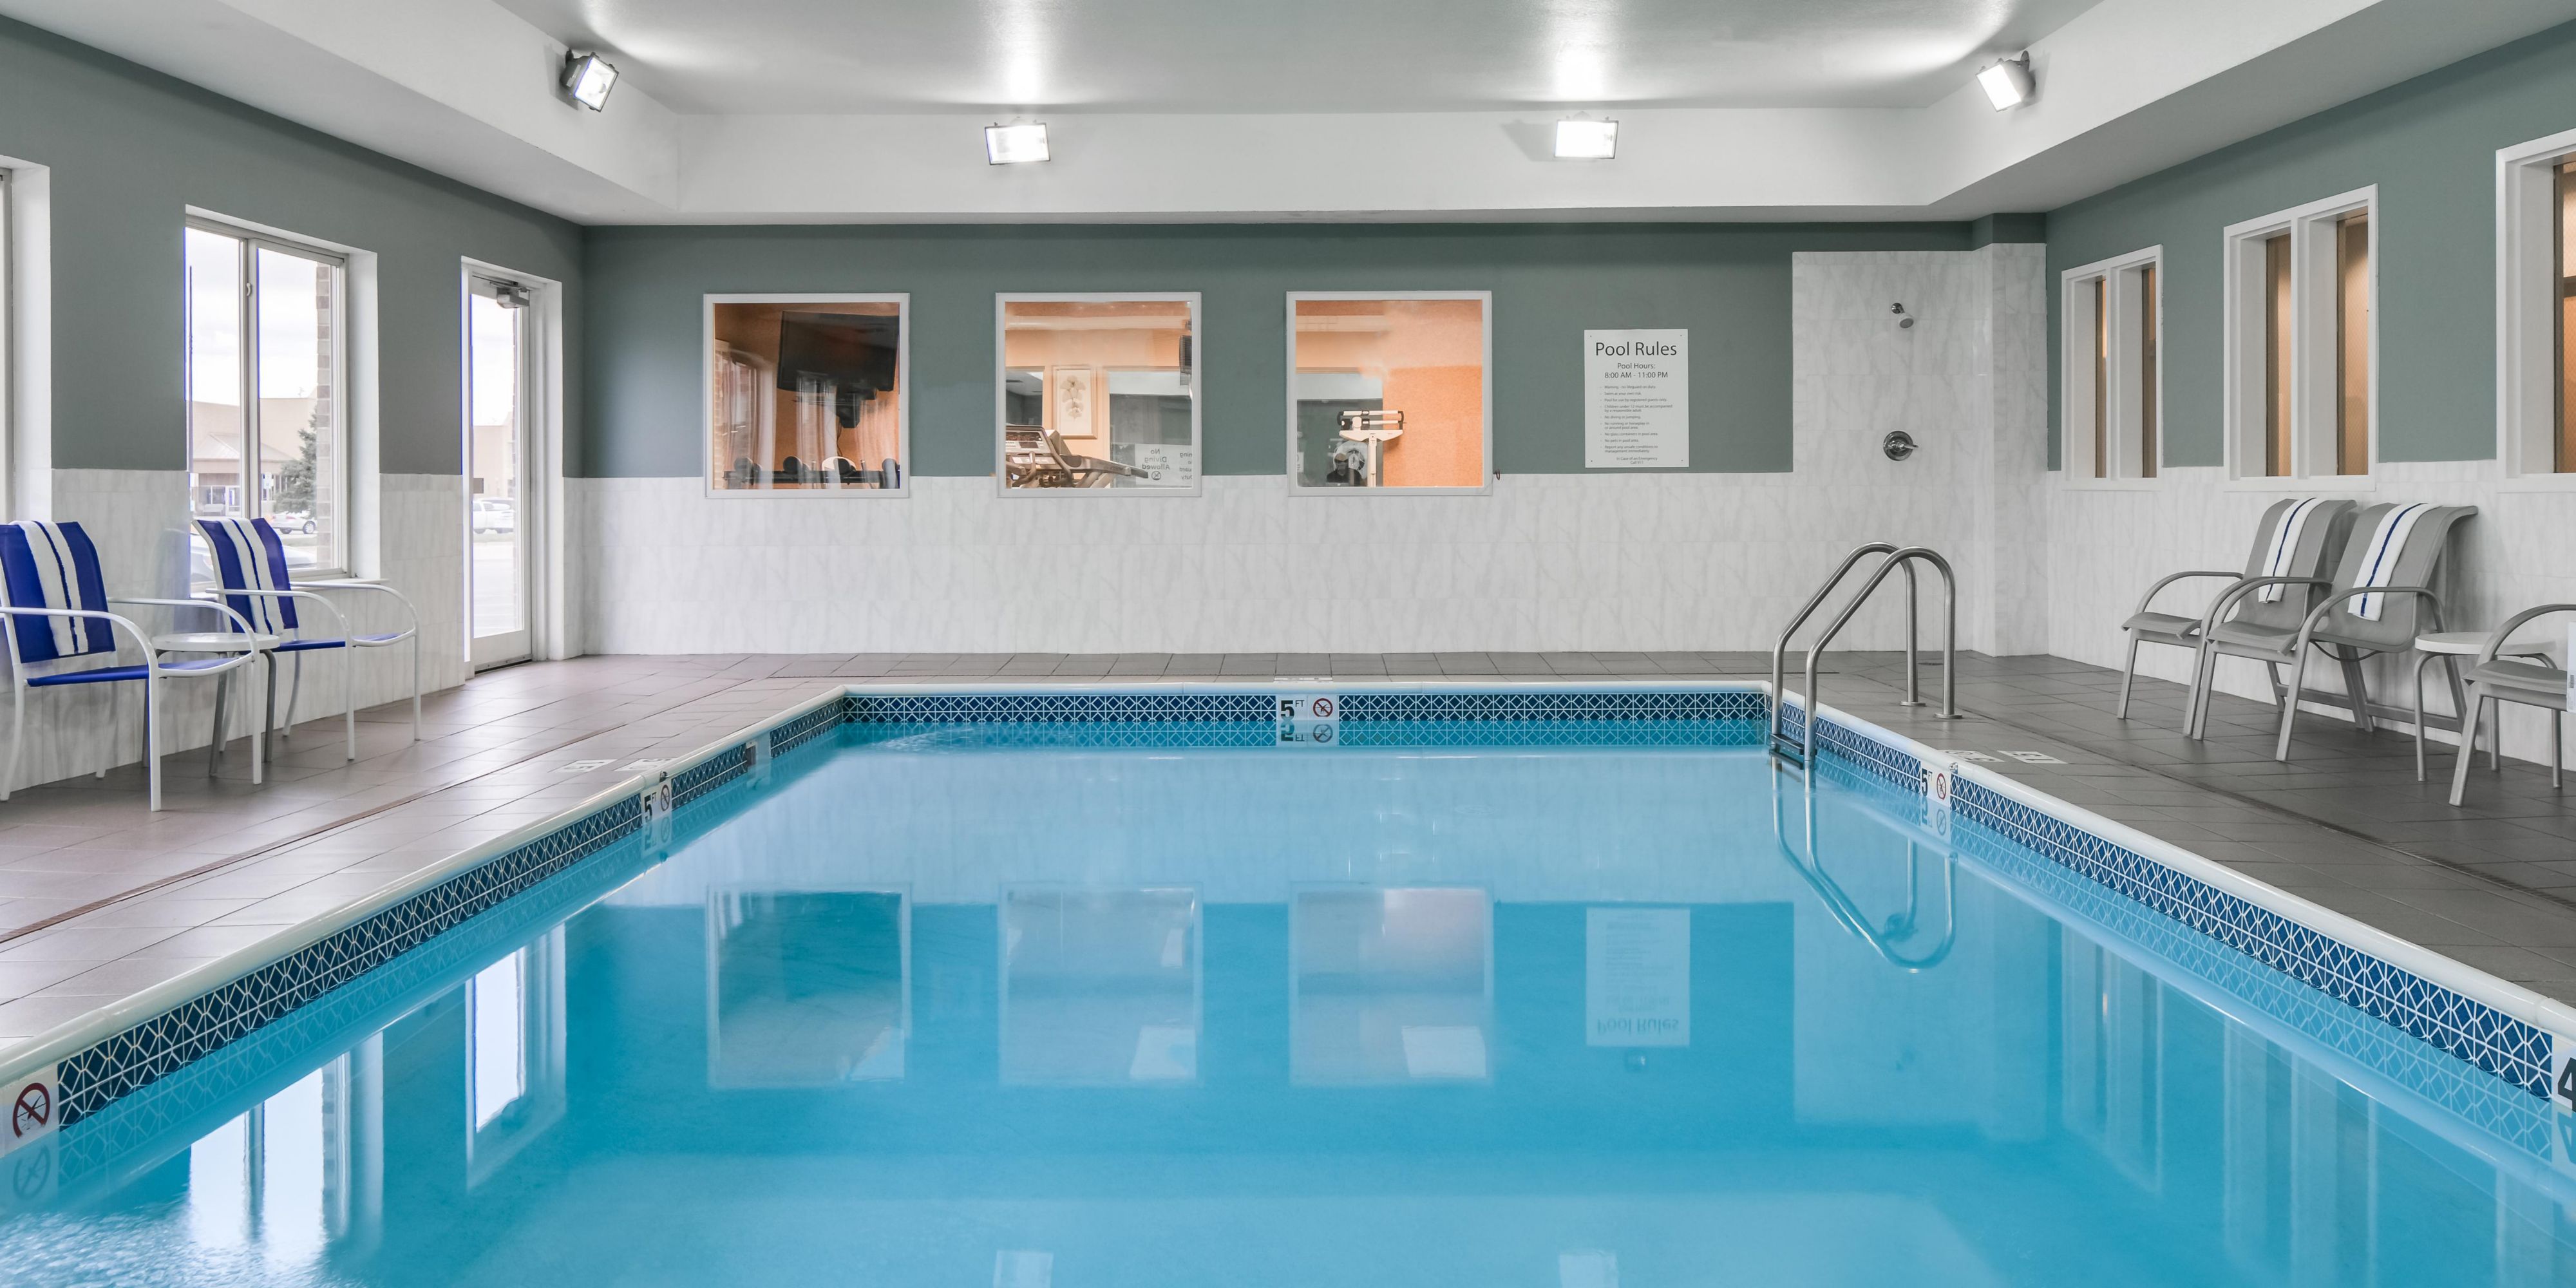 Our heated indoor pool is open from 8 am to 11 pm daily. Guests can enjoy a swimming in our pool year round and keeping up with their exercise routine in our fitness center while traveling. An indoor pool with free breakfast makes our hotel a great choice for families. Book your leisure or corporate stay today!